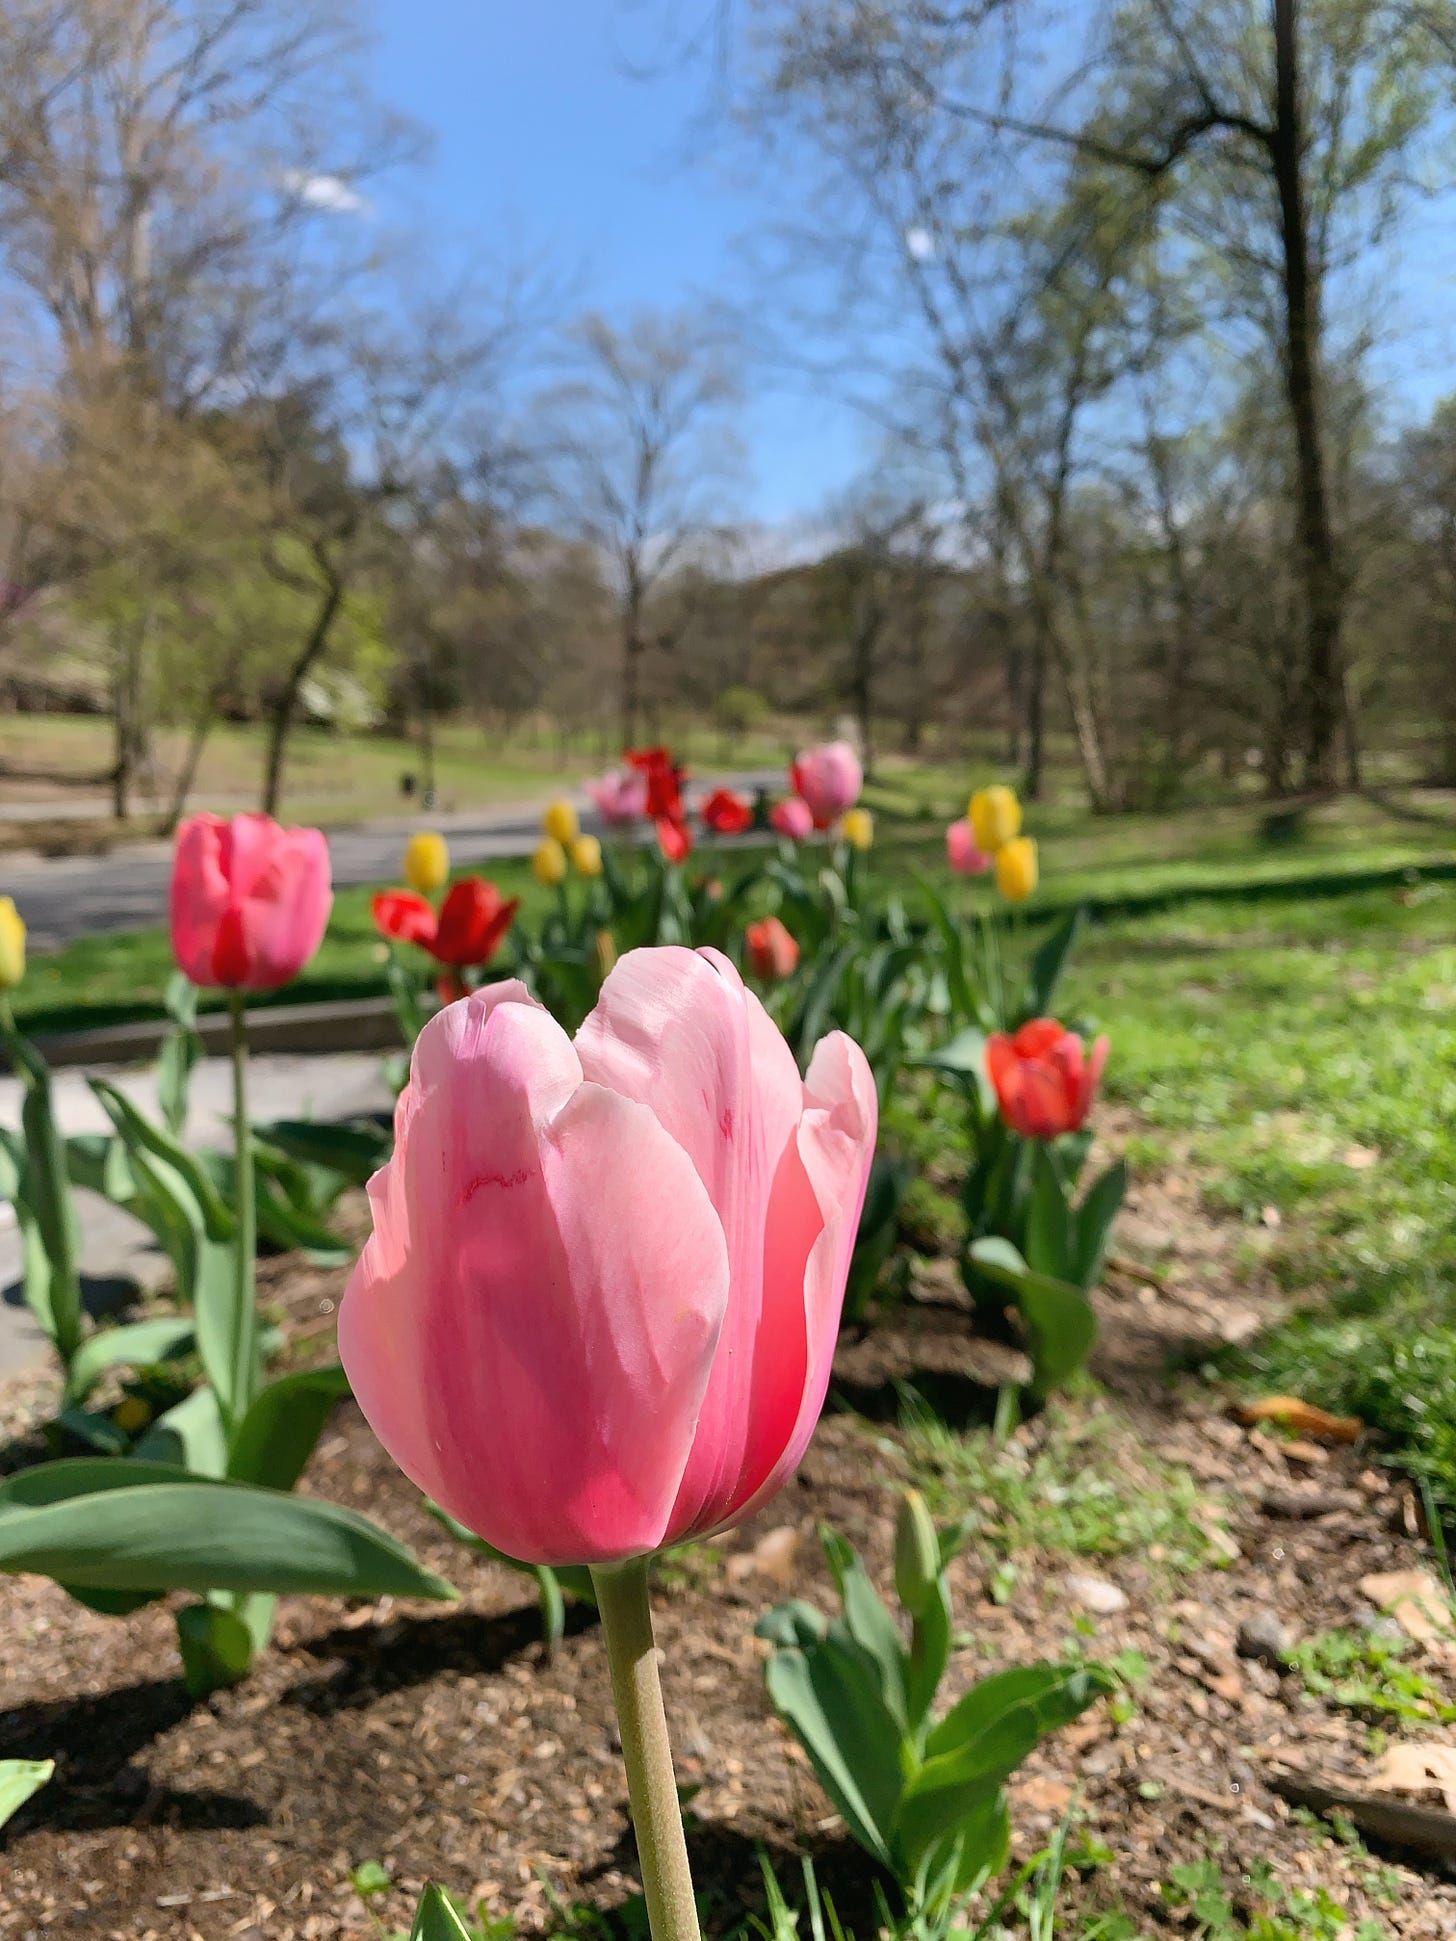 A bright pink tulip in focus with dozens of multi-colored tulips in the background. It's a sunny day at a park.